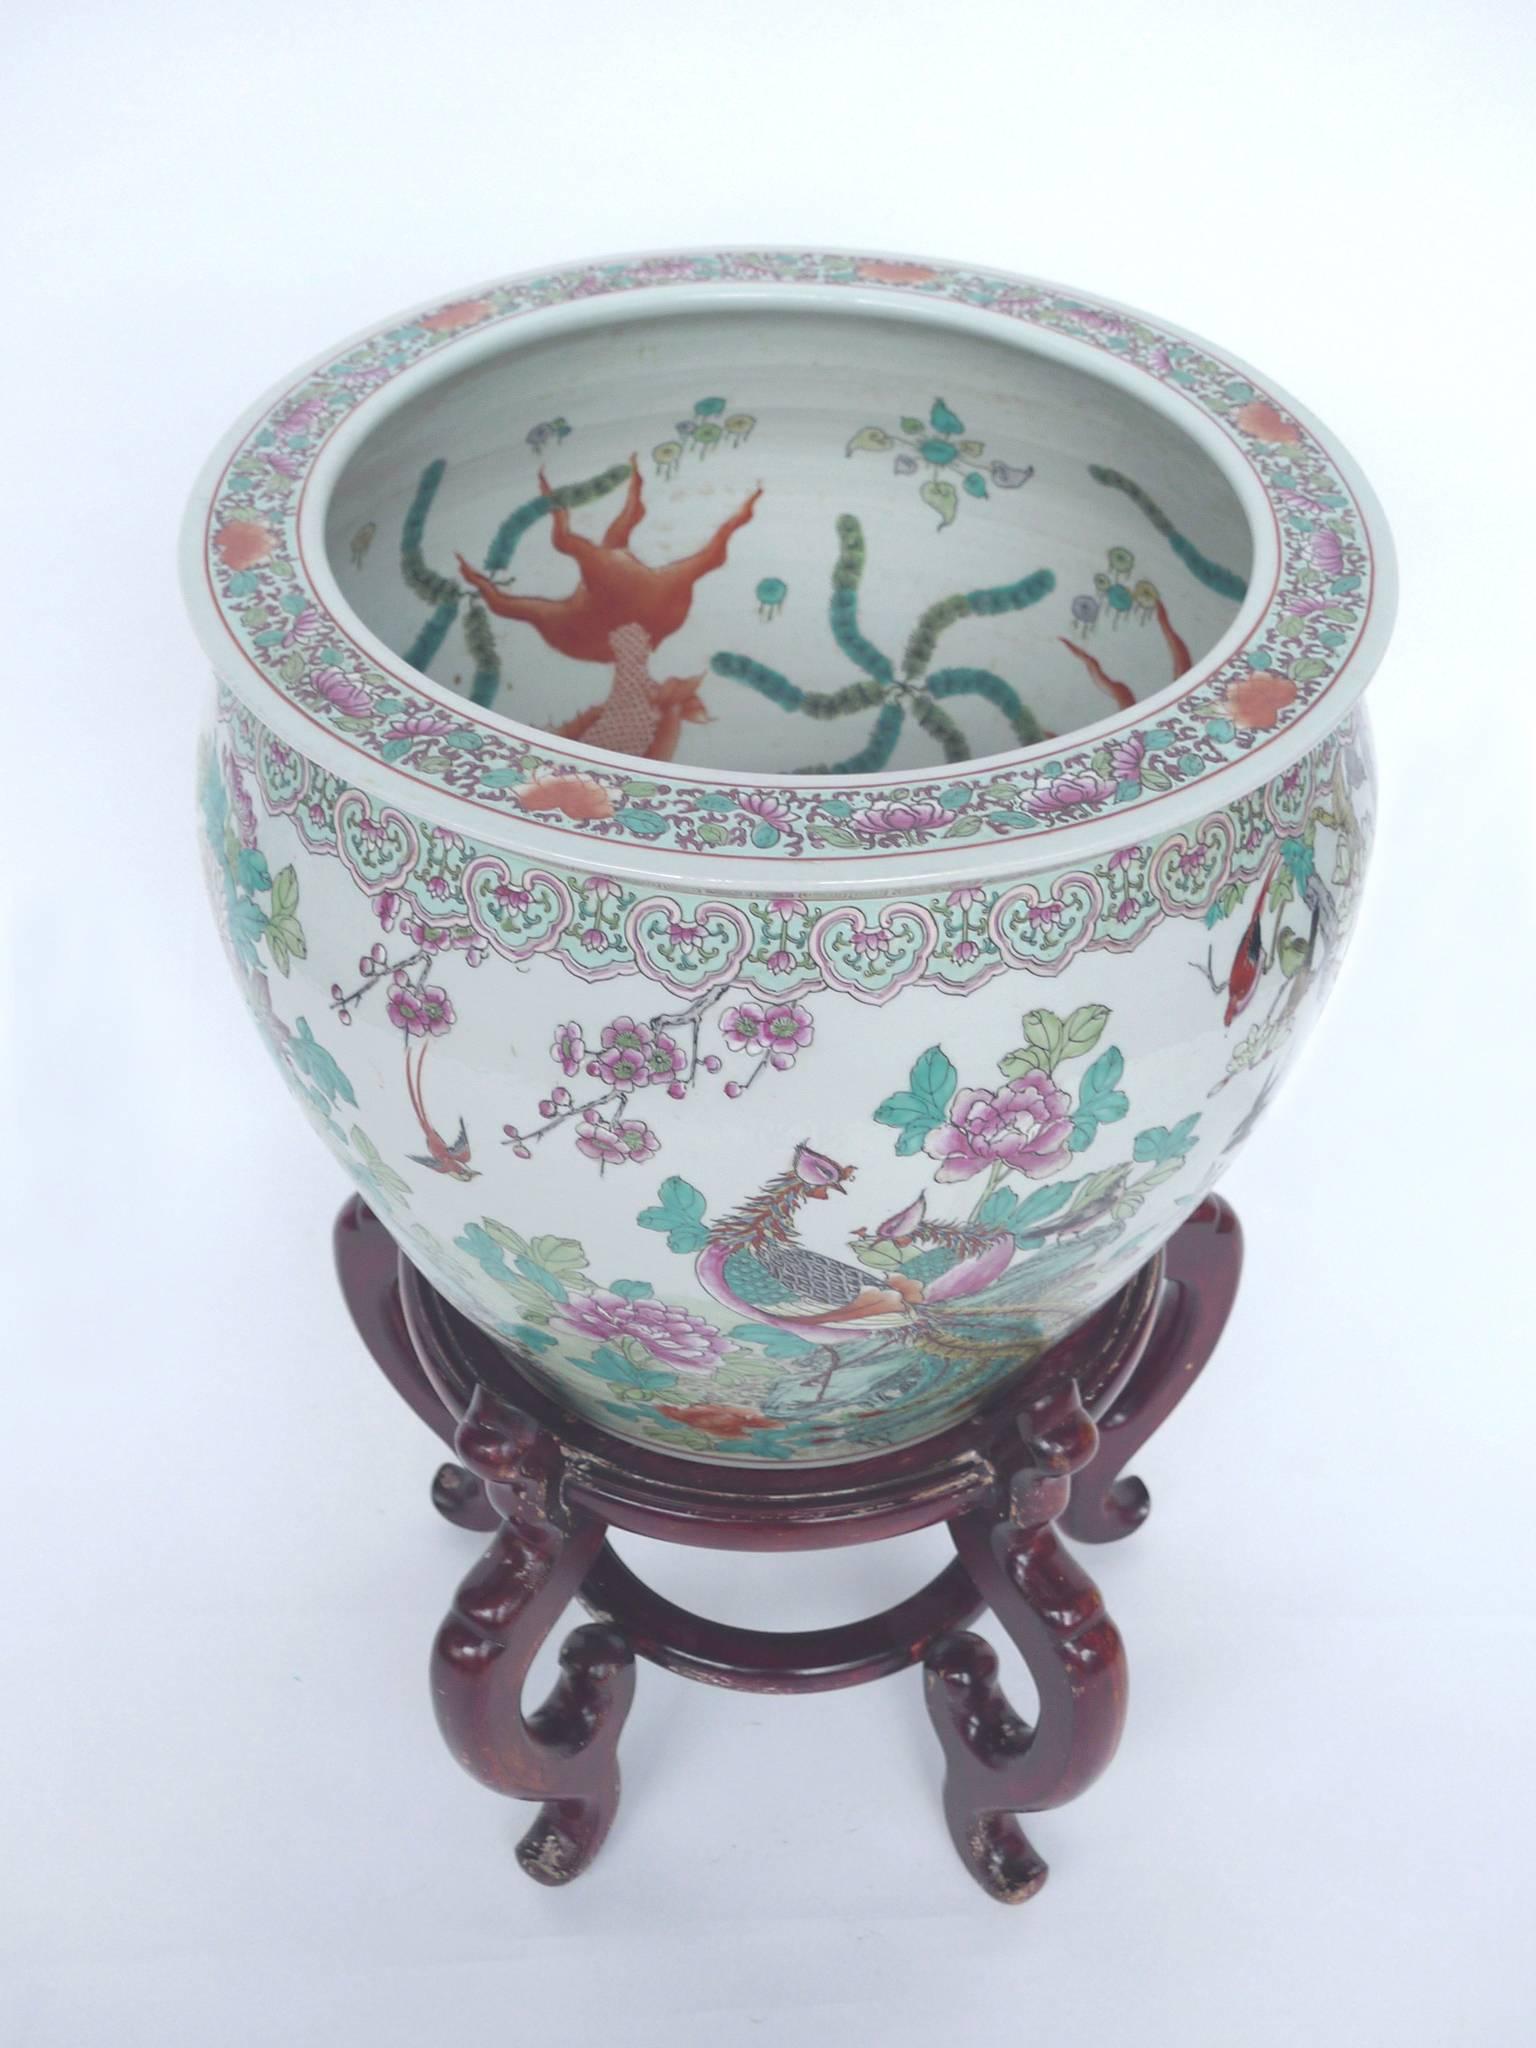 This white ceramic fishbowl is beautifully hand-painted. The exterior design depicts colorful birds and flowers rendered in soft washes and finely drawn contours, while the interior's design is of goldfish and plant flora. The bowl is accompanied by